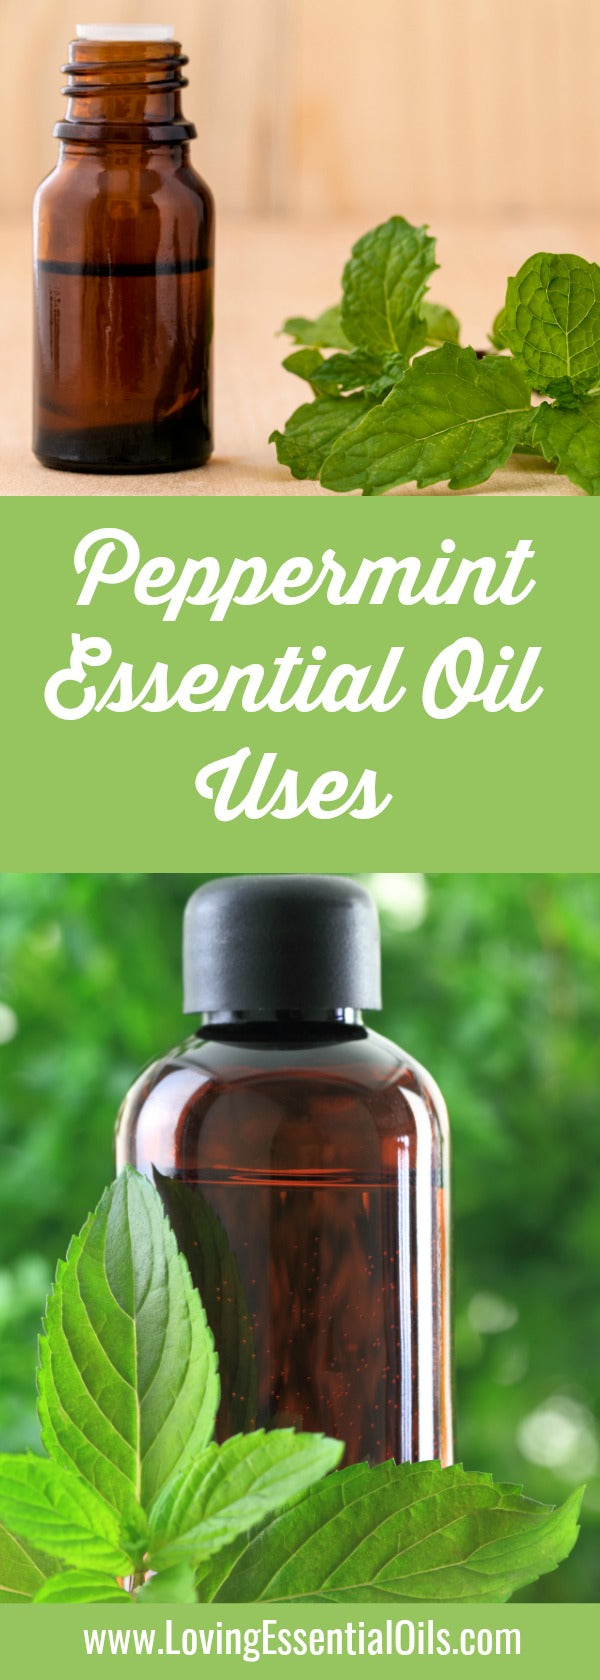 Peppermint Essential Oil Recipes by Loving Essential Oils